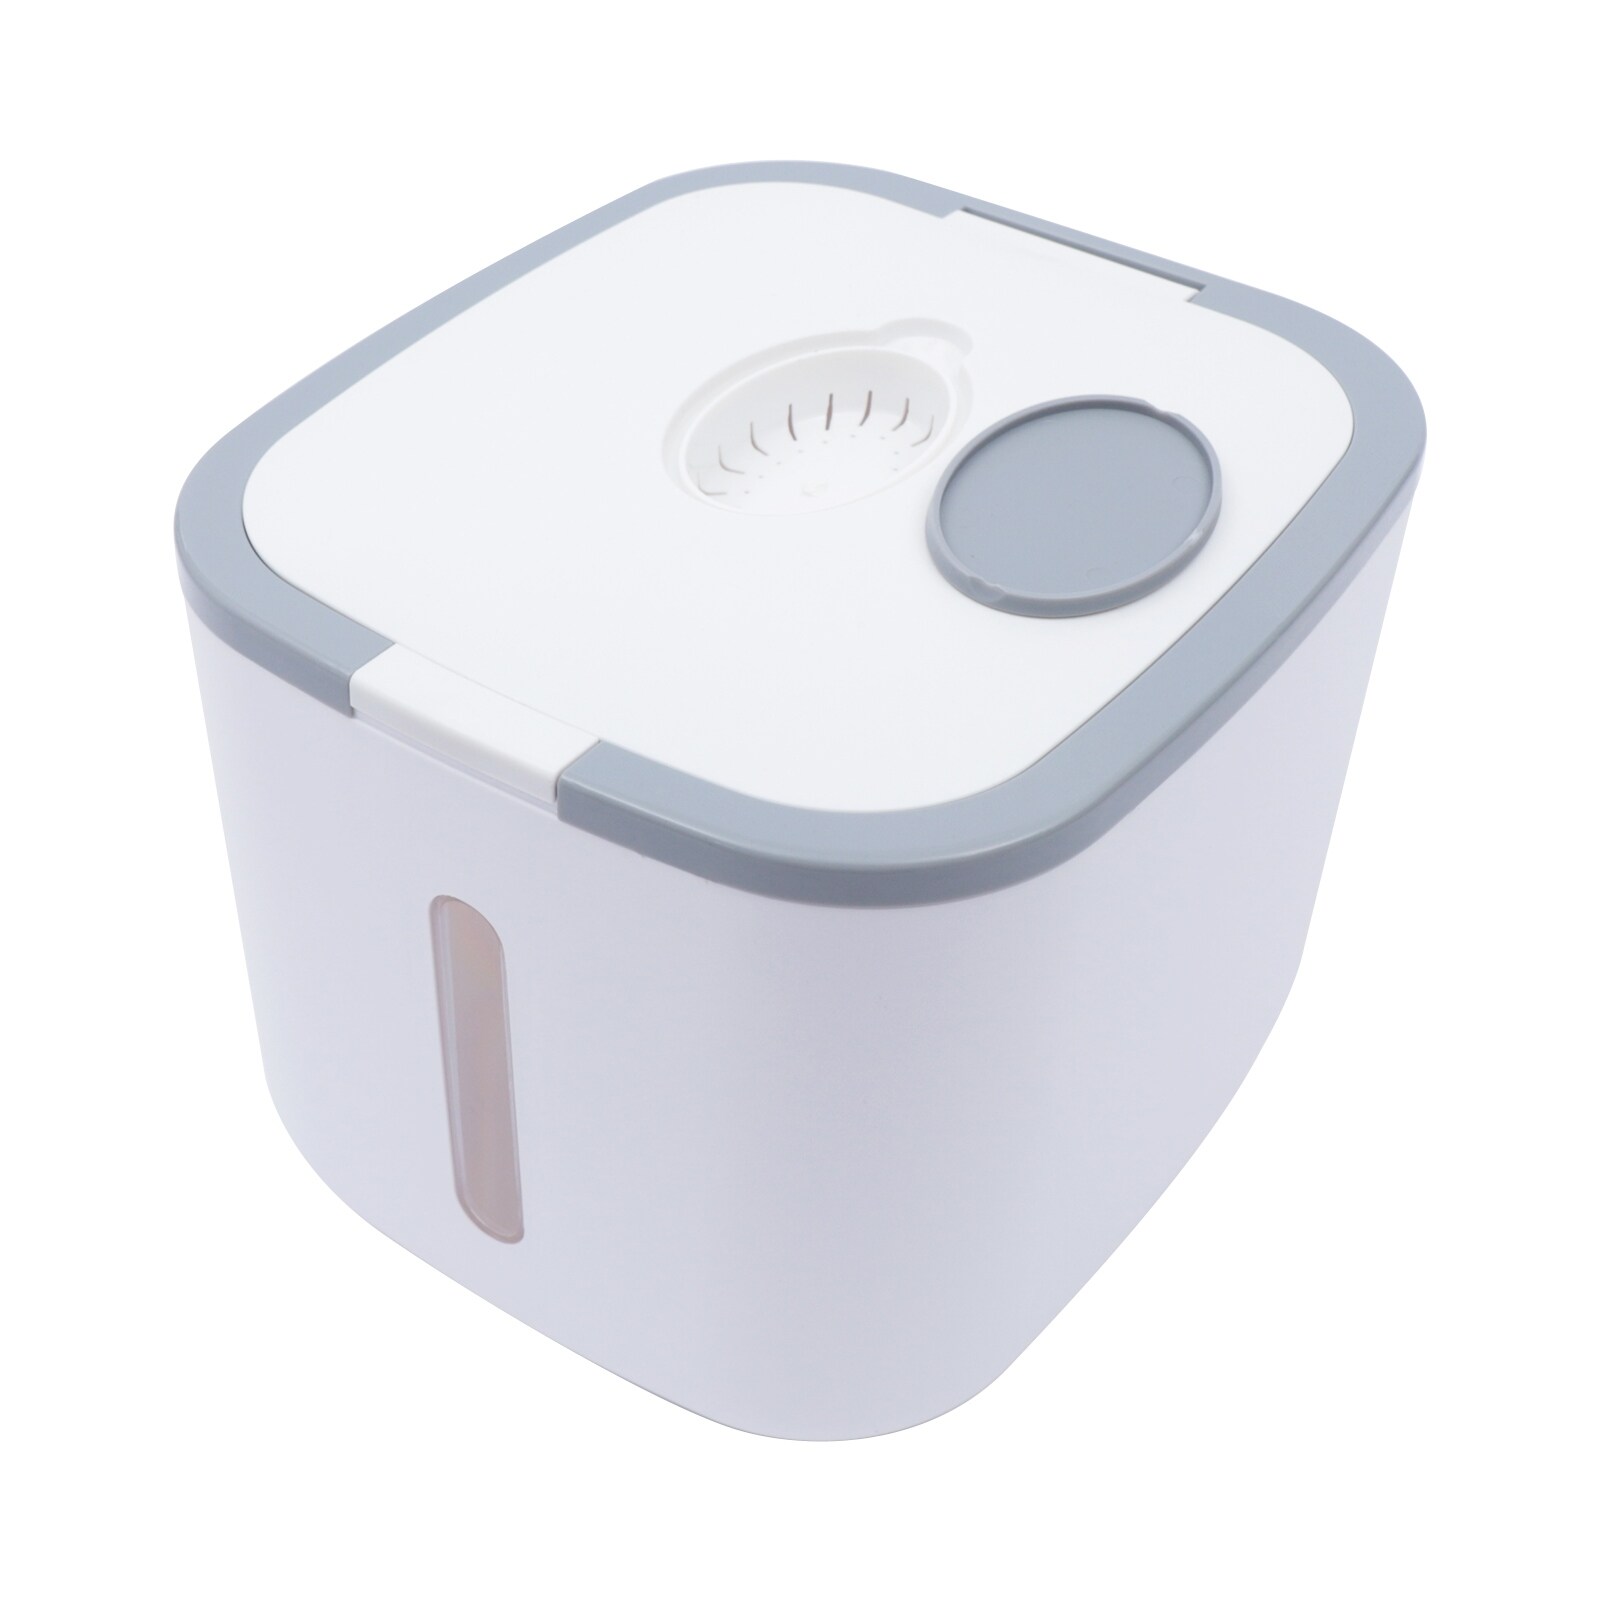 https://ak1.ostkcdn.com/images/products/is/images/direct/a45ddd99d35e8a04379733e55de5f64ca4c870ca/Airtight-Rice-Dispenser-22-Lbs-Automatic-Flip-Cover-Food-Storage-Container.jpg